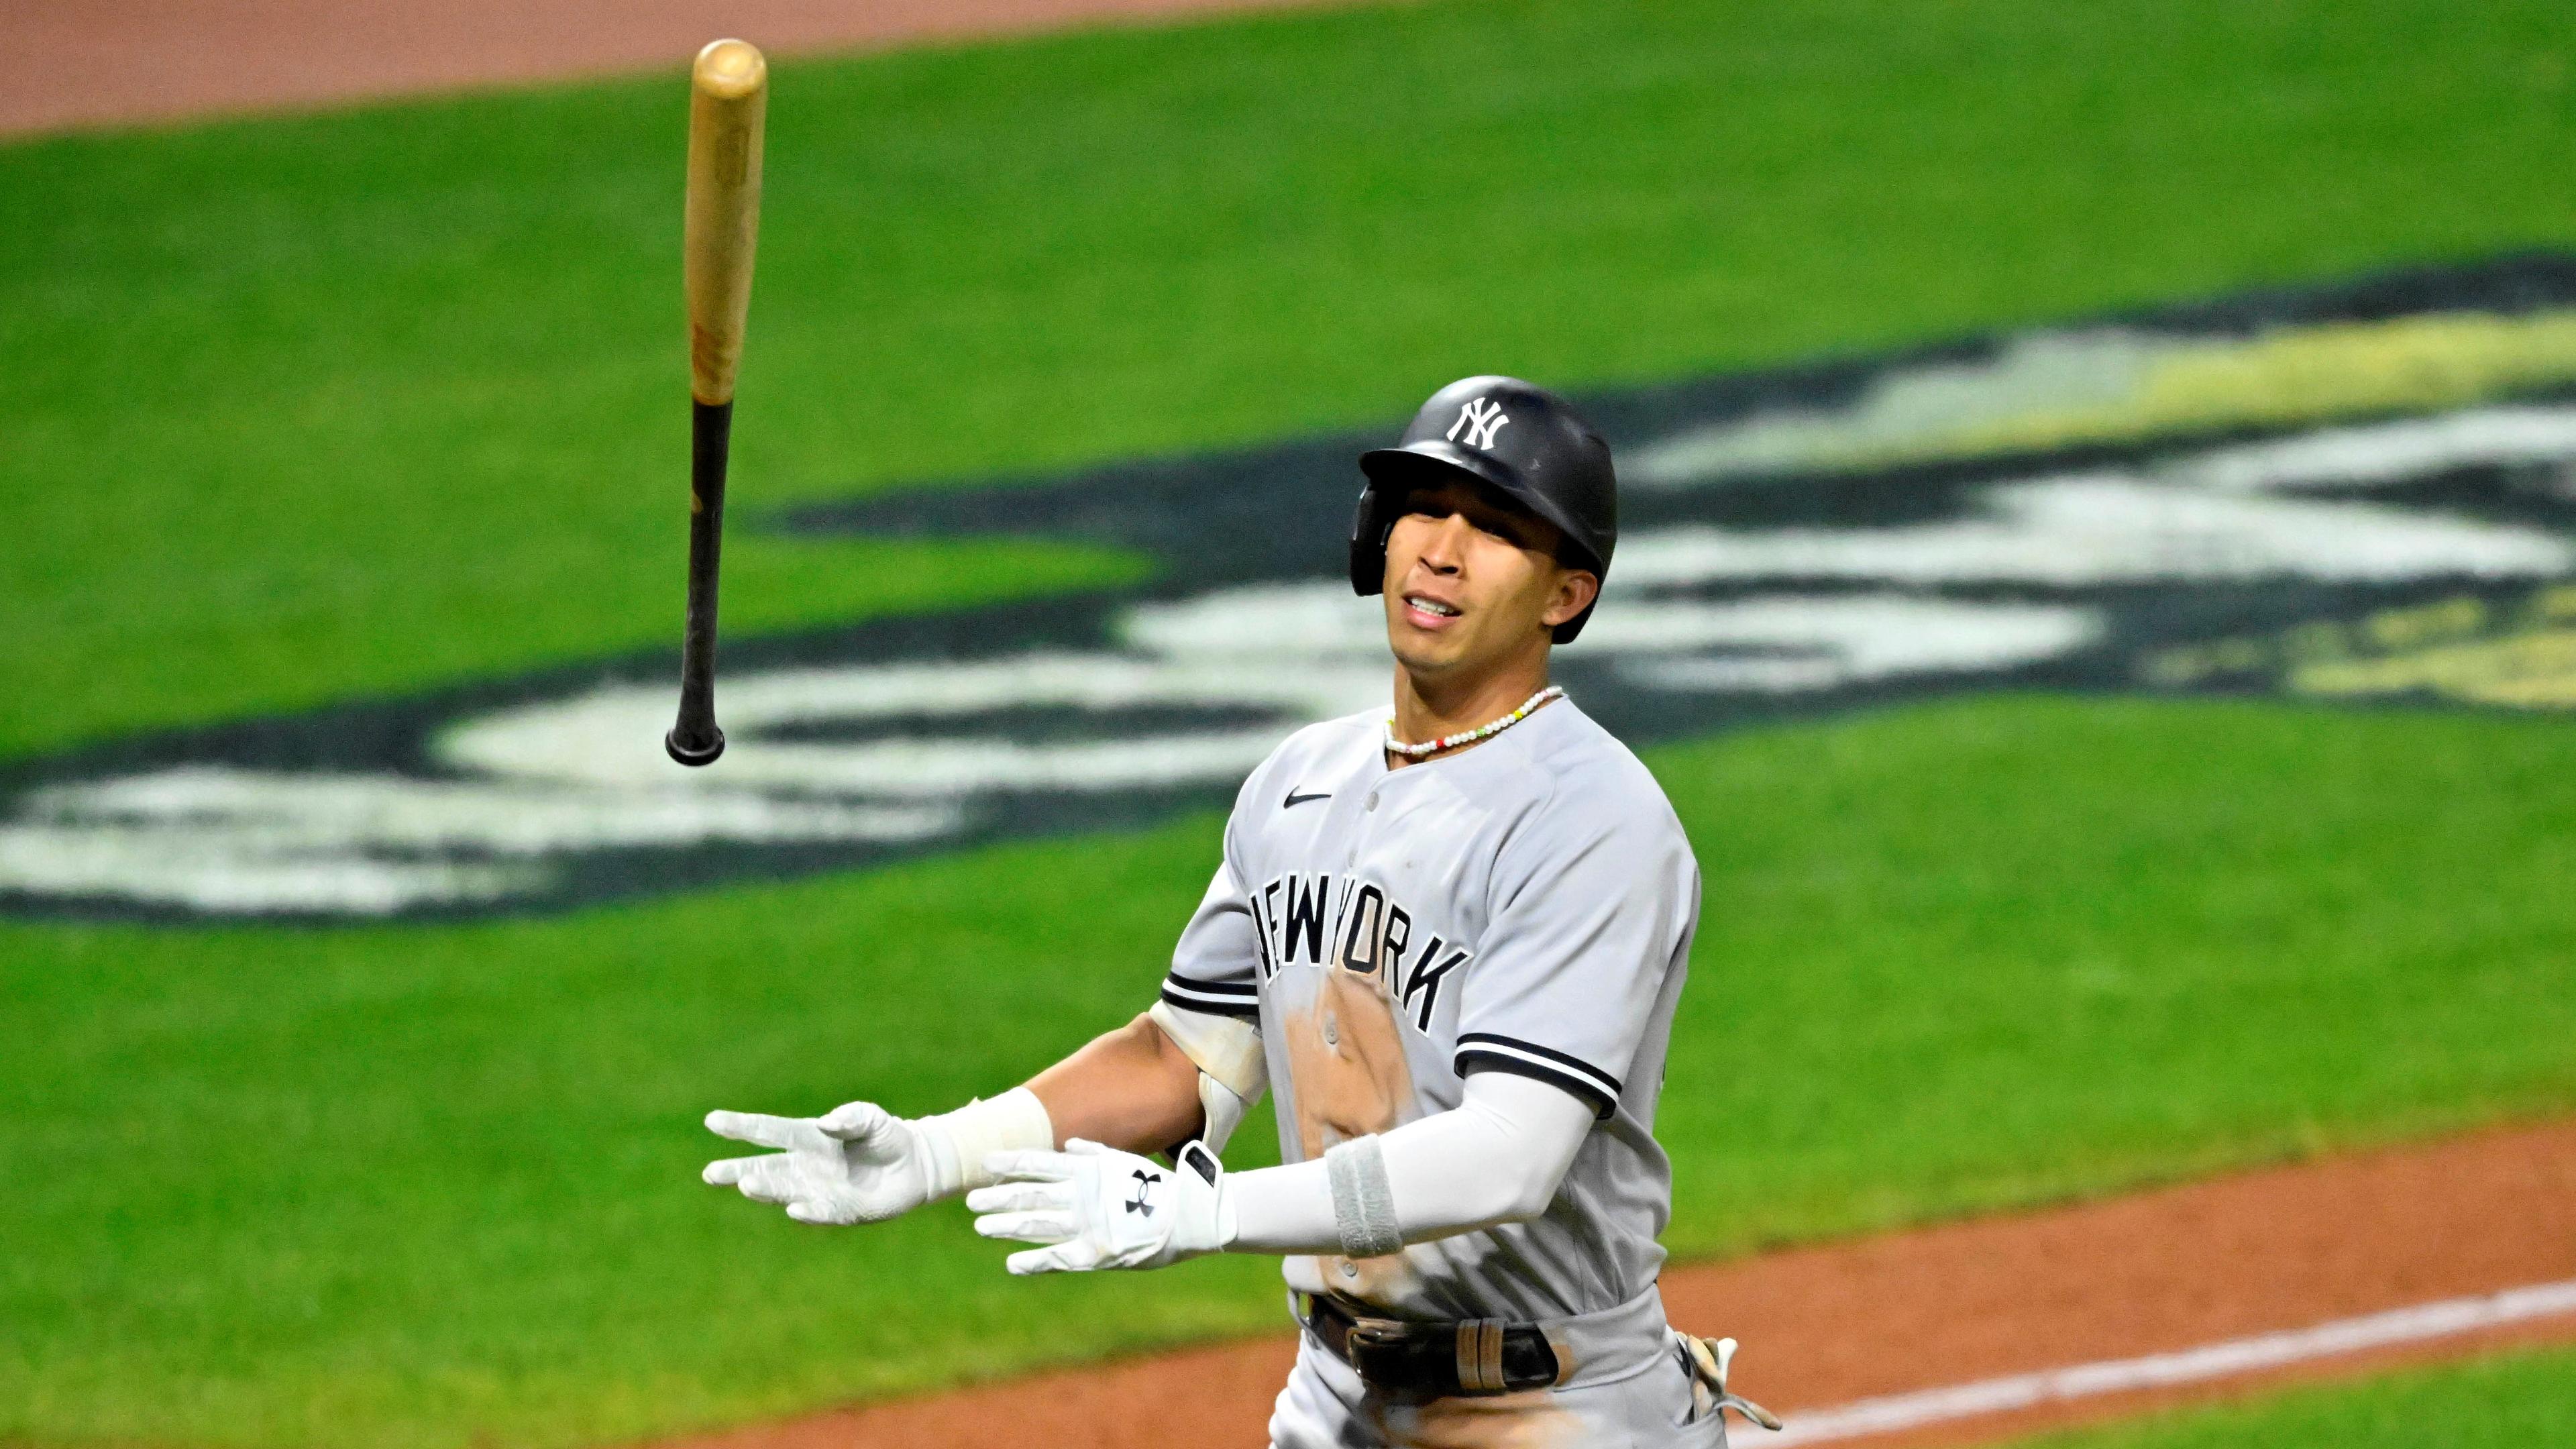 Oct 15, 2022; Cleveland, Ohio, USA; New York Yankees first baseman Oswaldo Cabrera (95) reacts after hitting a two run home run against the Cleveland Guardians in the fifth inning during game three of the NLDS for the 2022 MLB Playoffs at Progressive Field. Mandatory Credit: David Richard-USA TODAY Sports / © David Richard-USA TODAY Sports